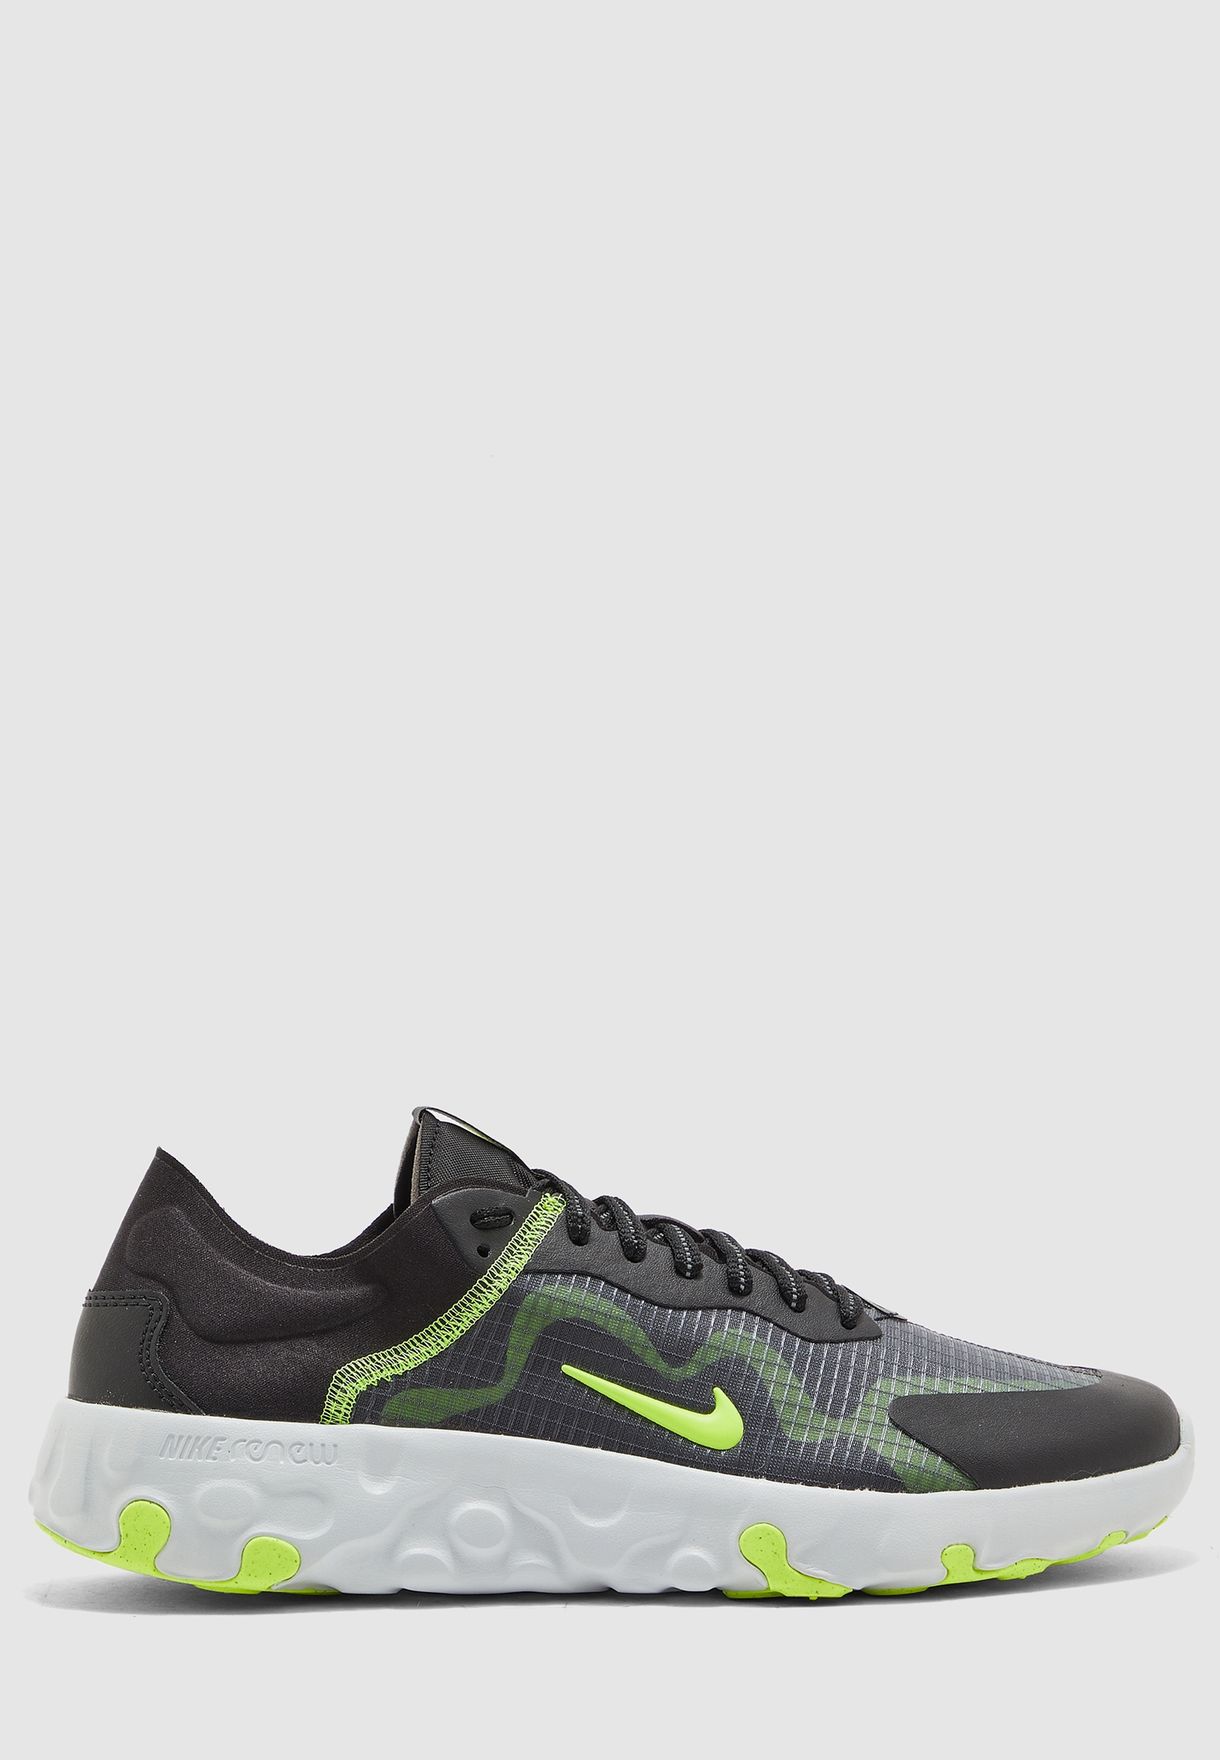 nike renew lucent green